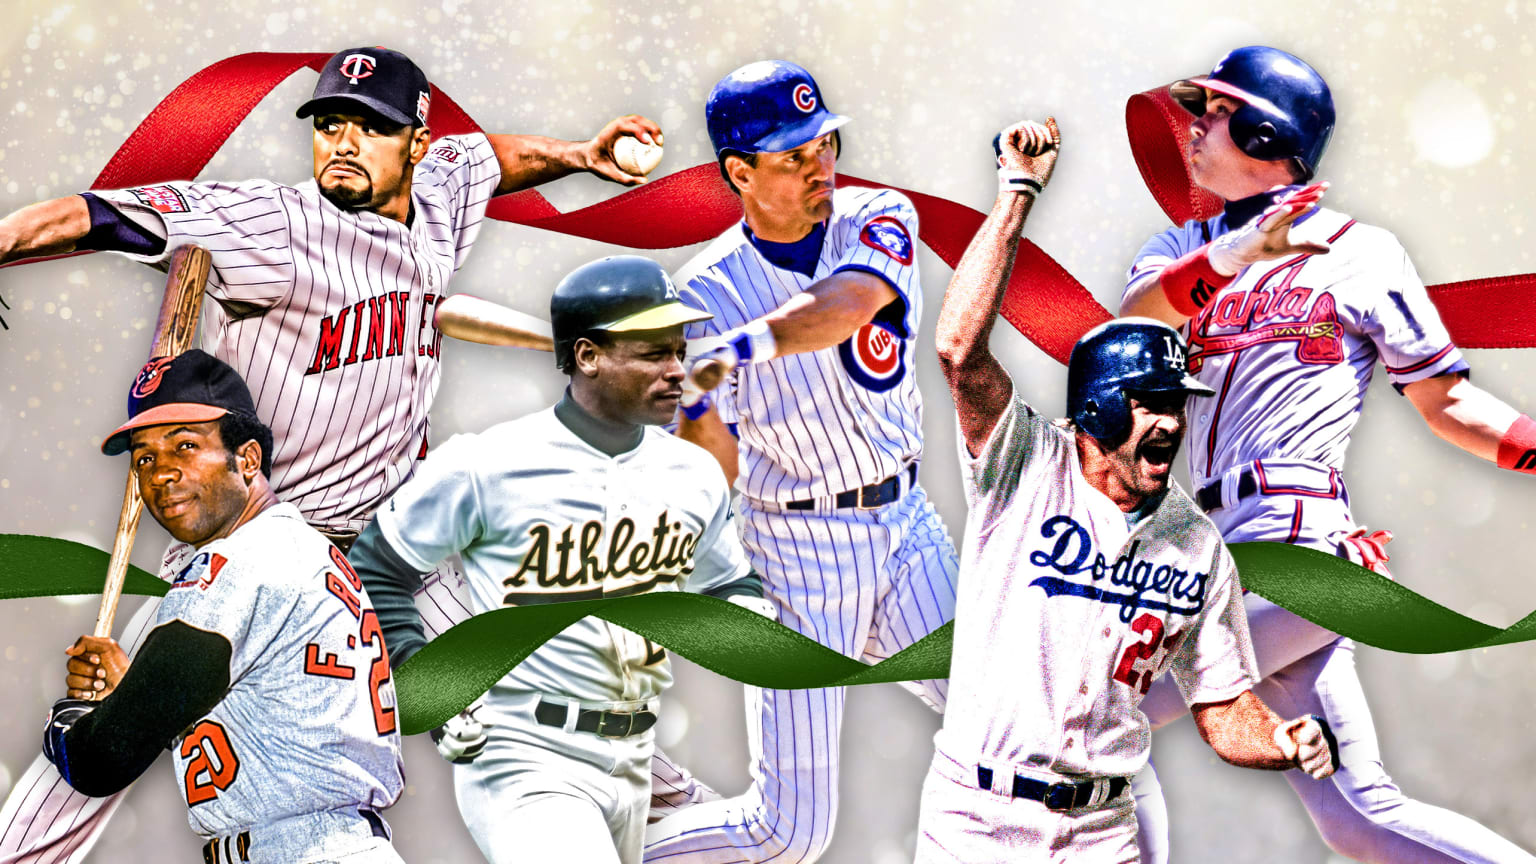 A photo montage of the Orioles' Frank Robinson, the A's Rickey Henderson, the Dodgers' Kirk Gibson, the Braves' Chipper Jones, the Cubs' Ryne Sandberg and the Twins' Johan Santana